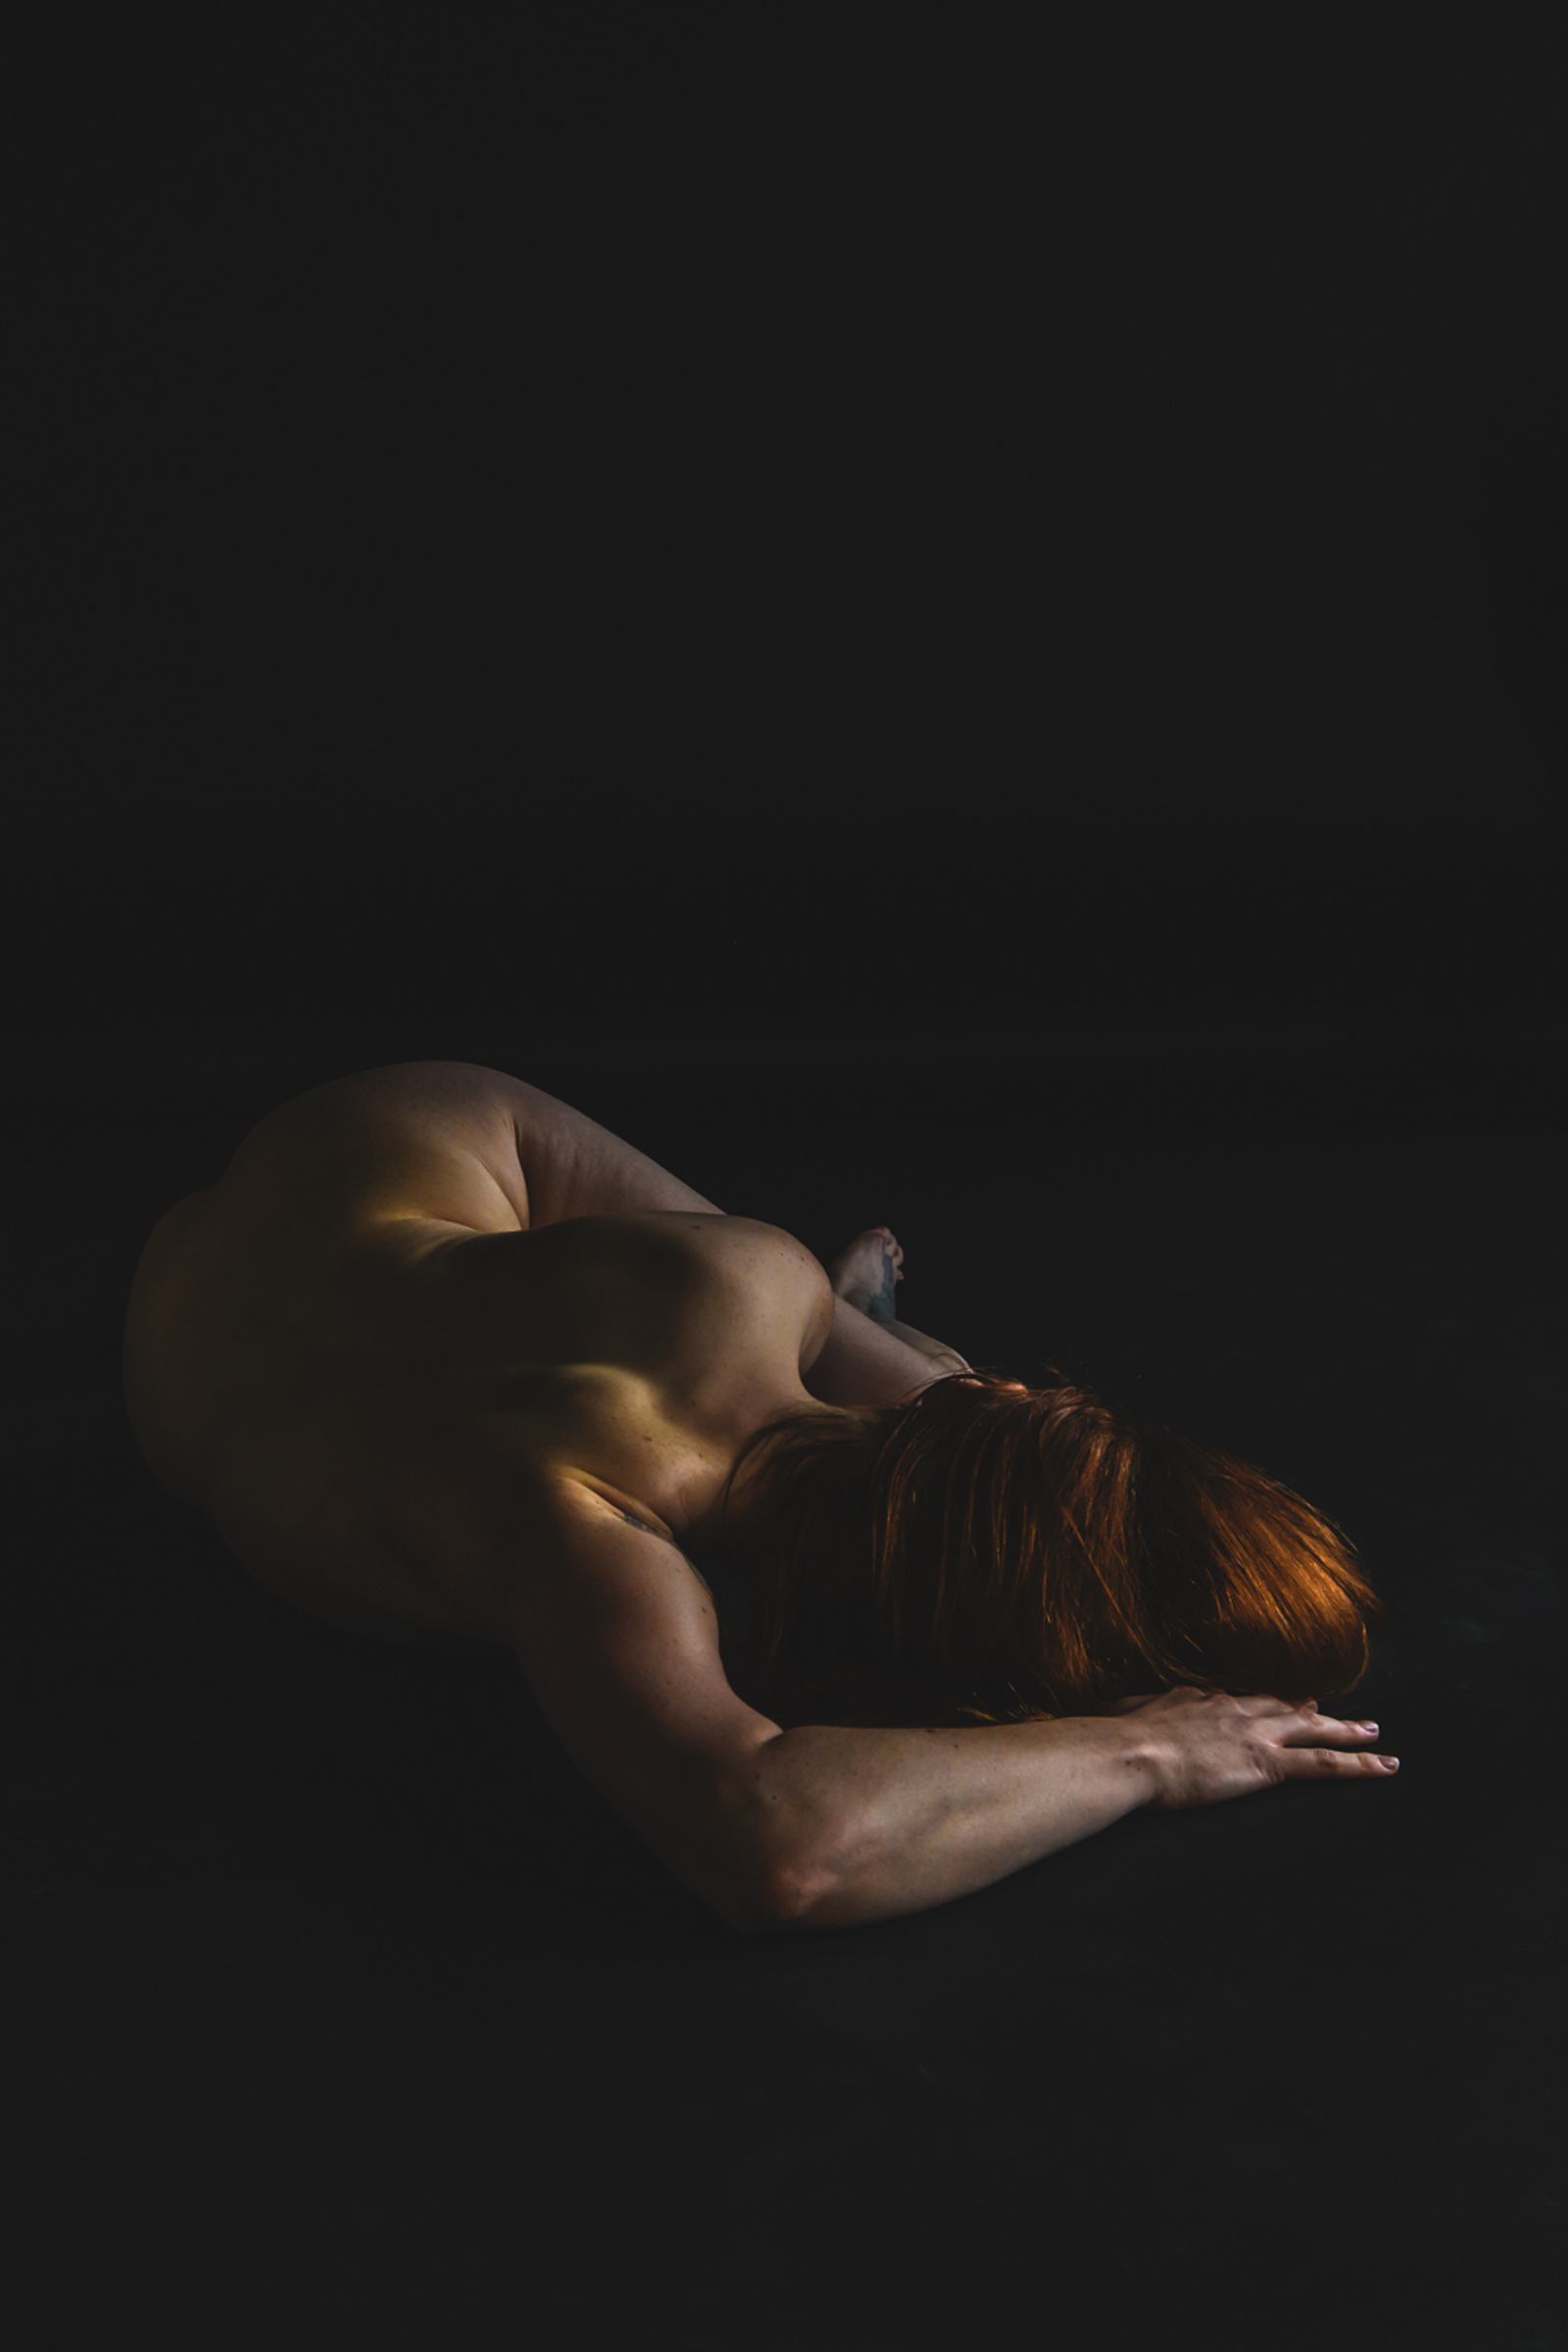 © Dominique Jean-Marie - Image from the Flesh/Dear (Chair/Chère) photography project